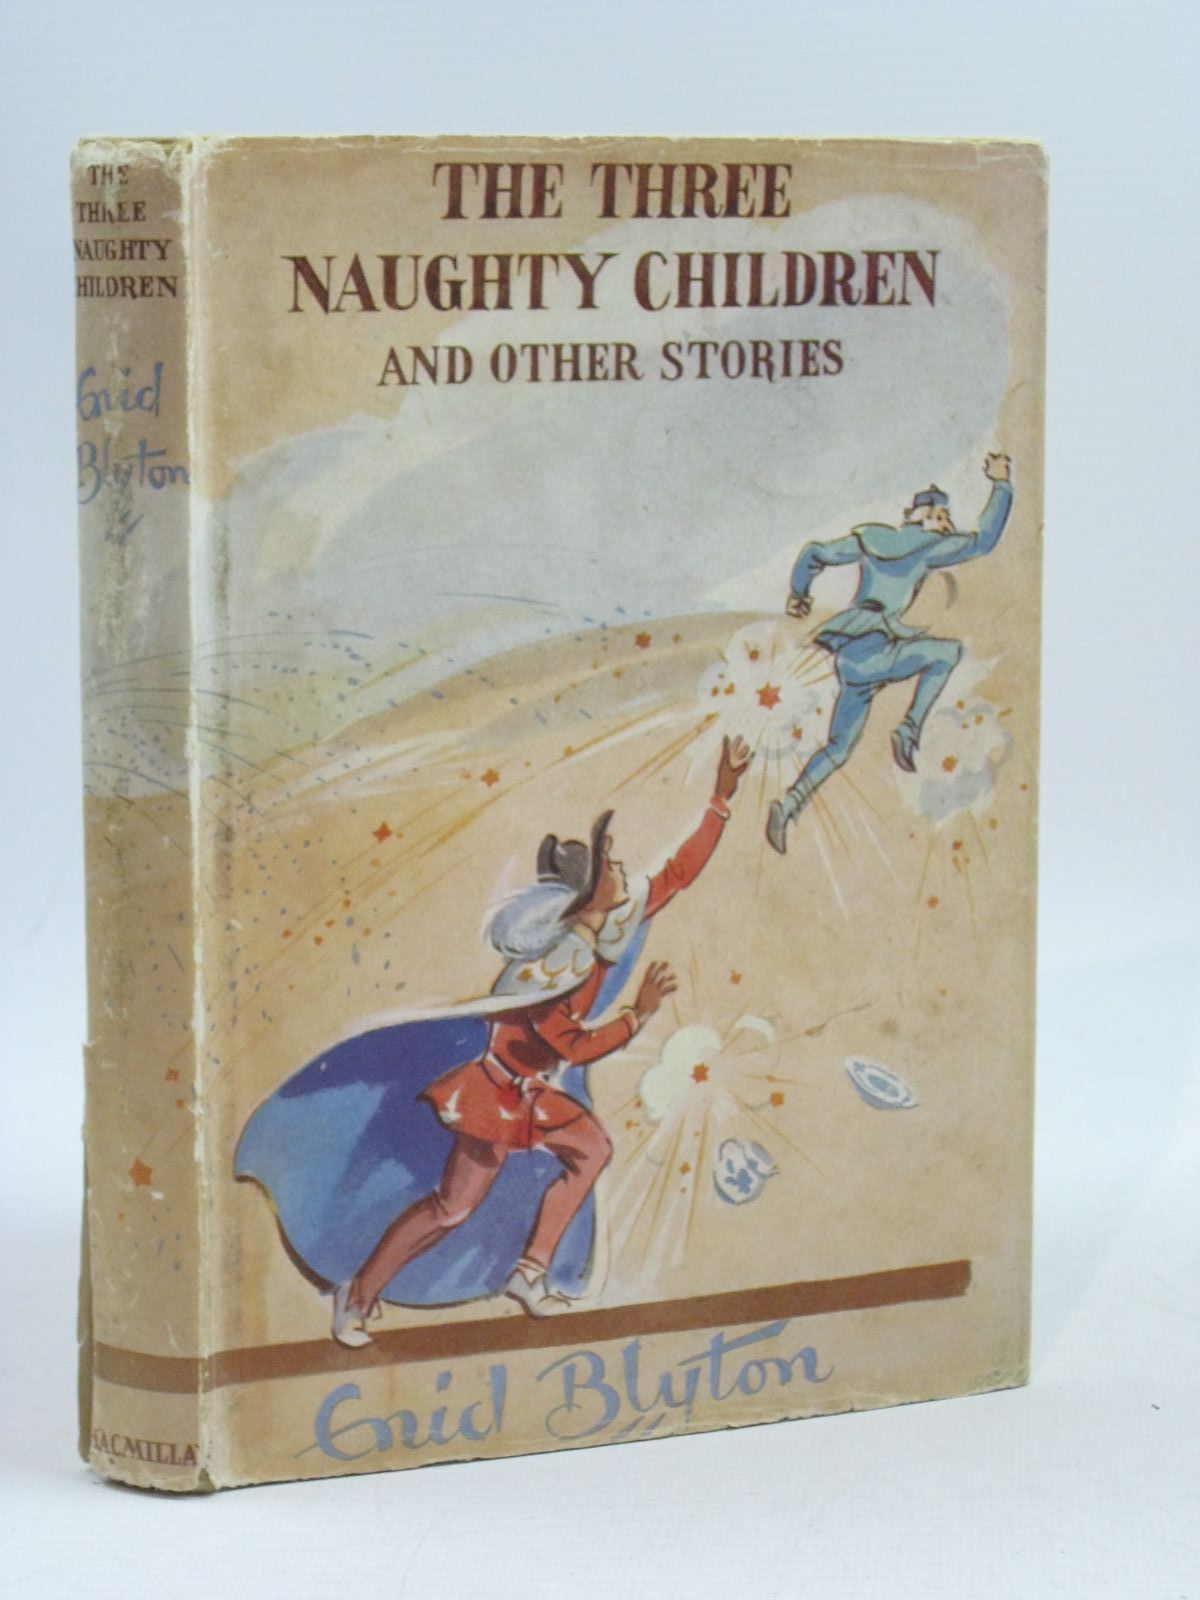 Photo of THE THREE NAUGHTY CHILDREN written by Blyton, Enid illustrated by Soper, Eileen published by Macmillan & Co. Ltd. (STOCK CODE: 1314610)  for sale by Stella & Rose's Books